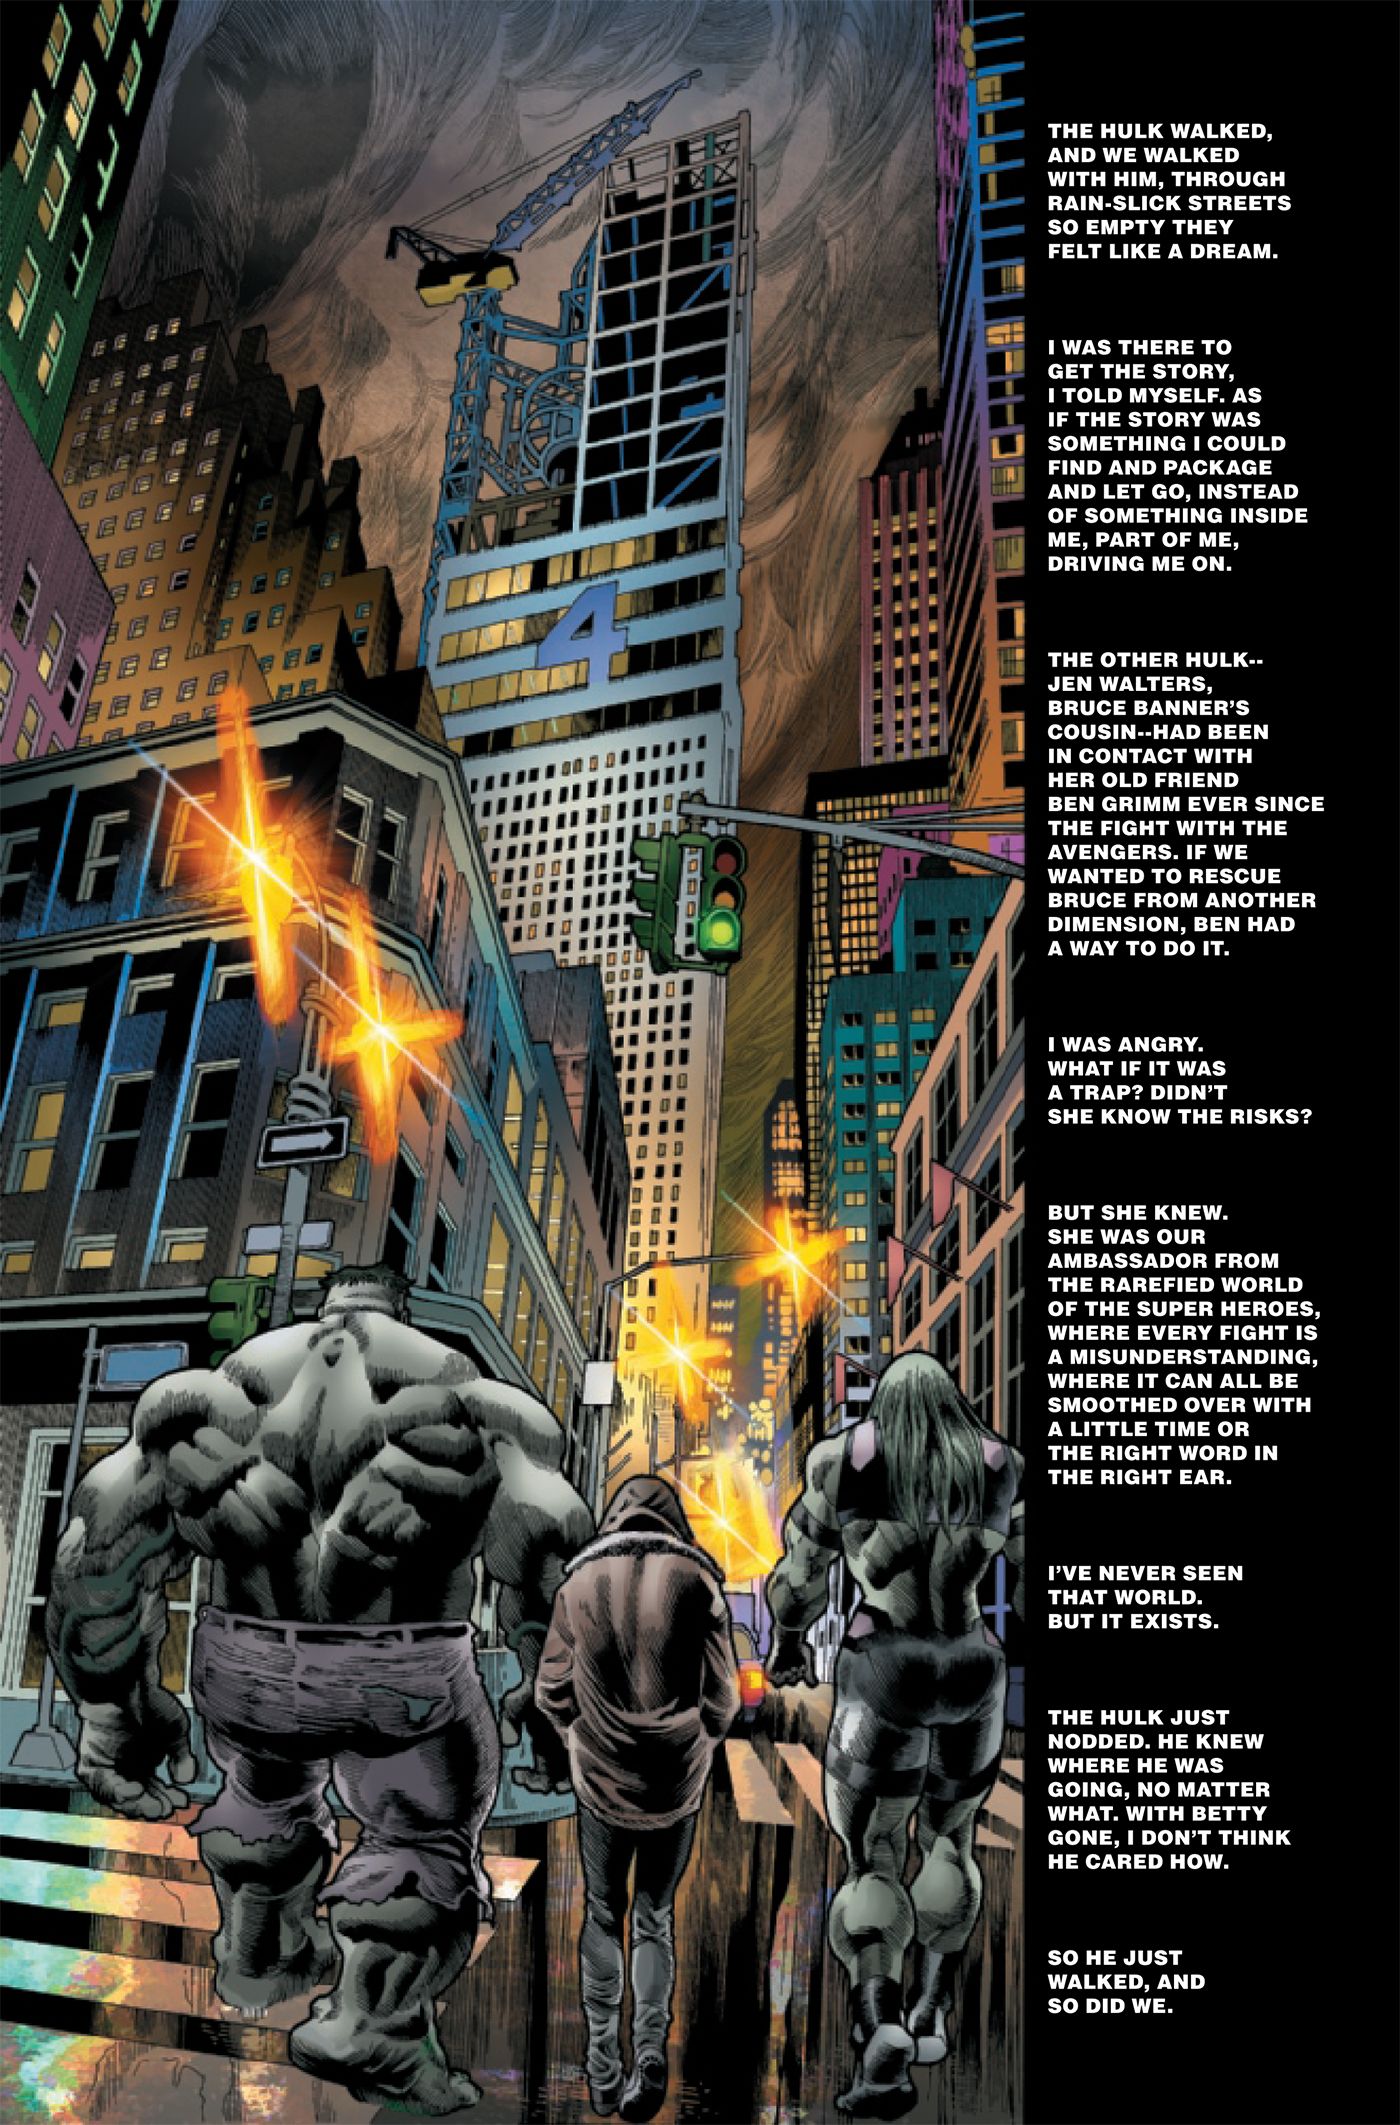 Hulk and company are walking towards the Baxter Building, the Fantastic Four's home base.